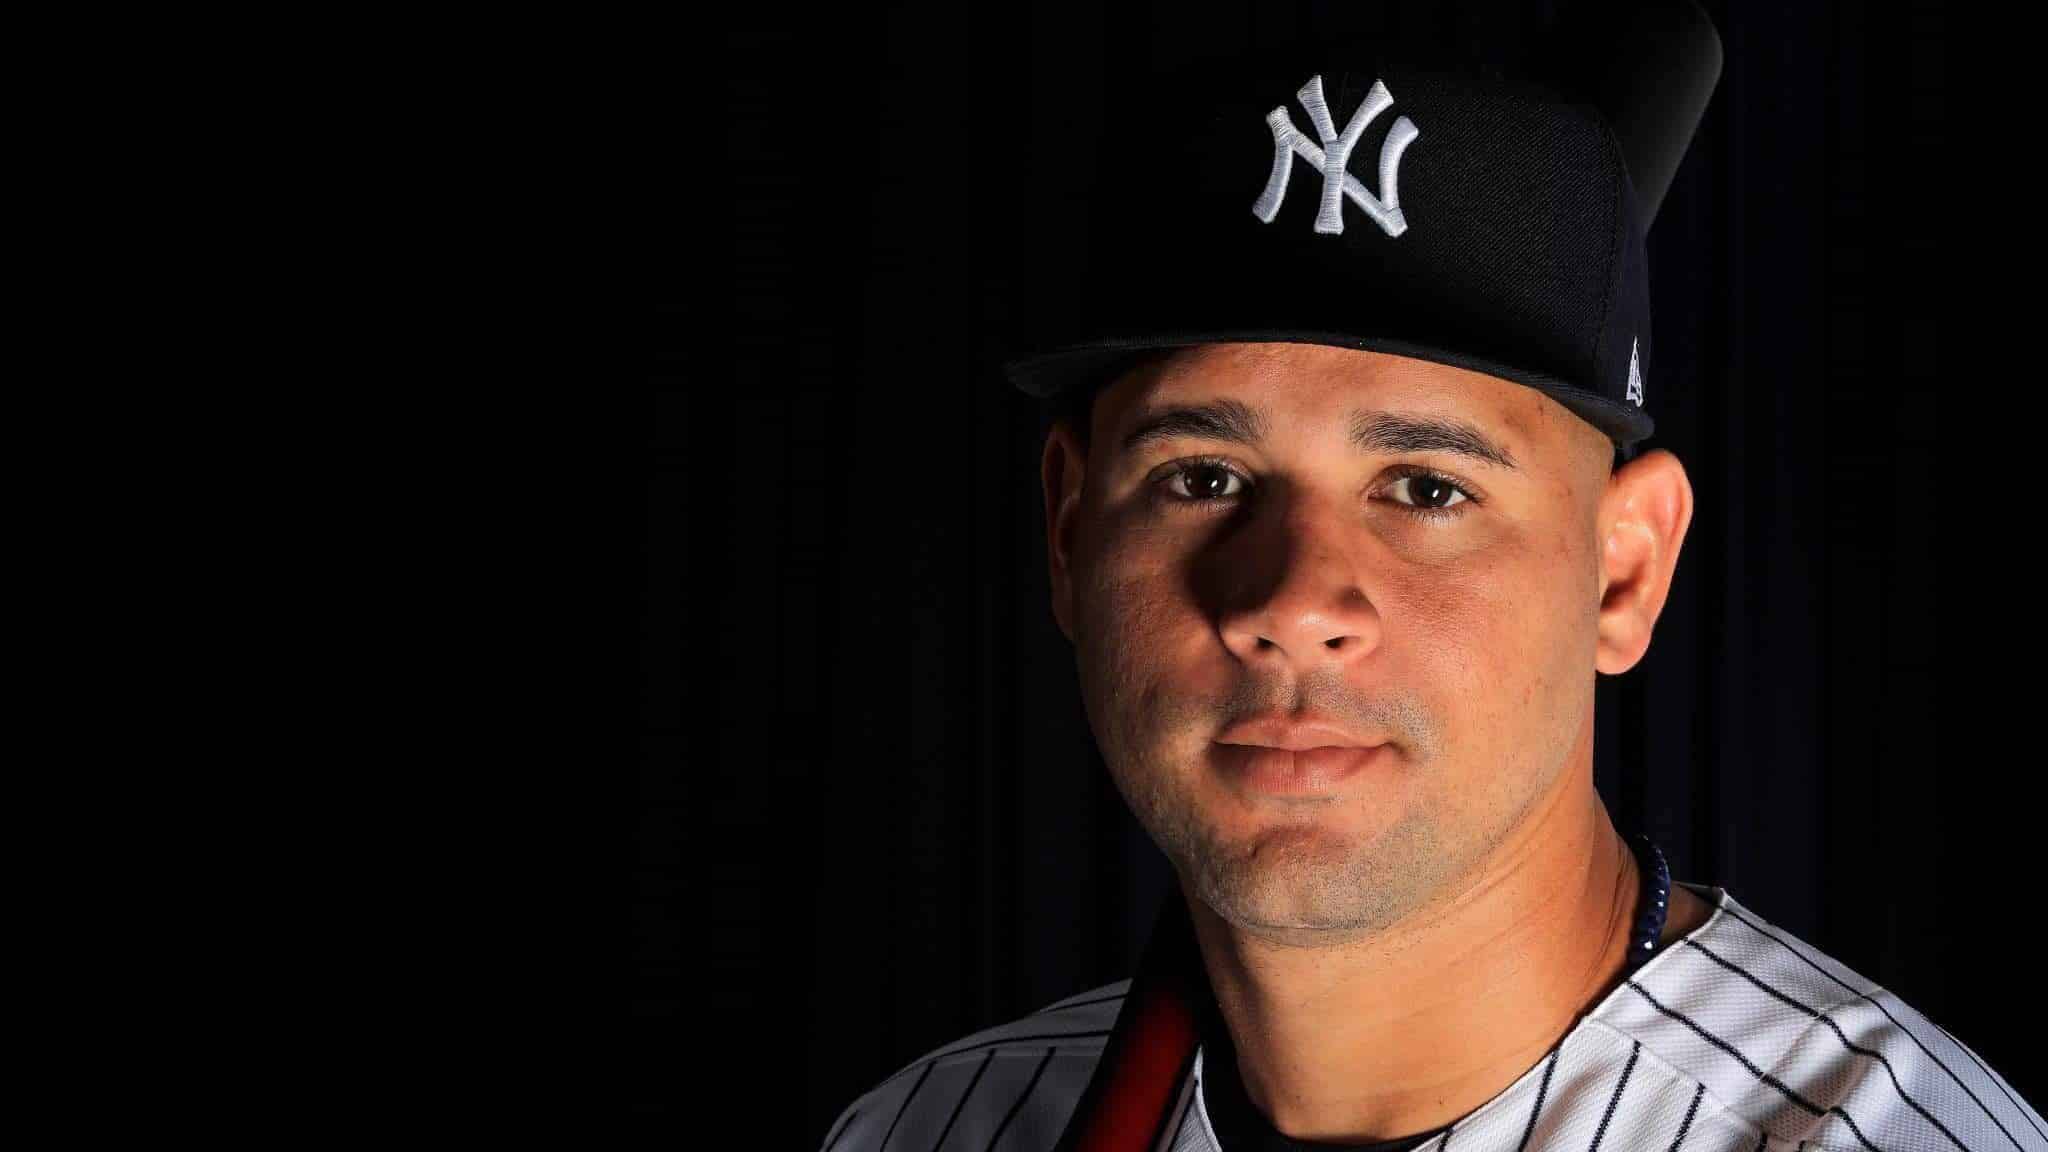 TAMPA, FLORIDA - FEBRUARY 20: Gary Sanchez #24 of the New York Yankees poses for a portrait during photo day on February 20, 2020 in Tampa, Florida.